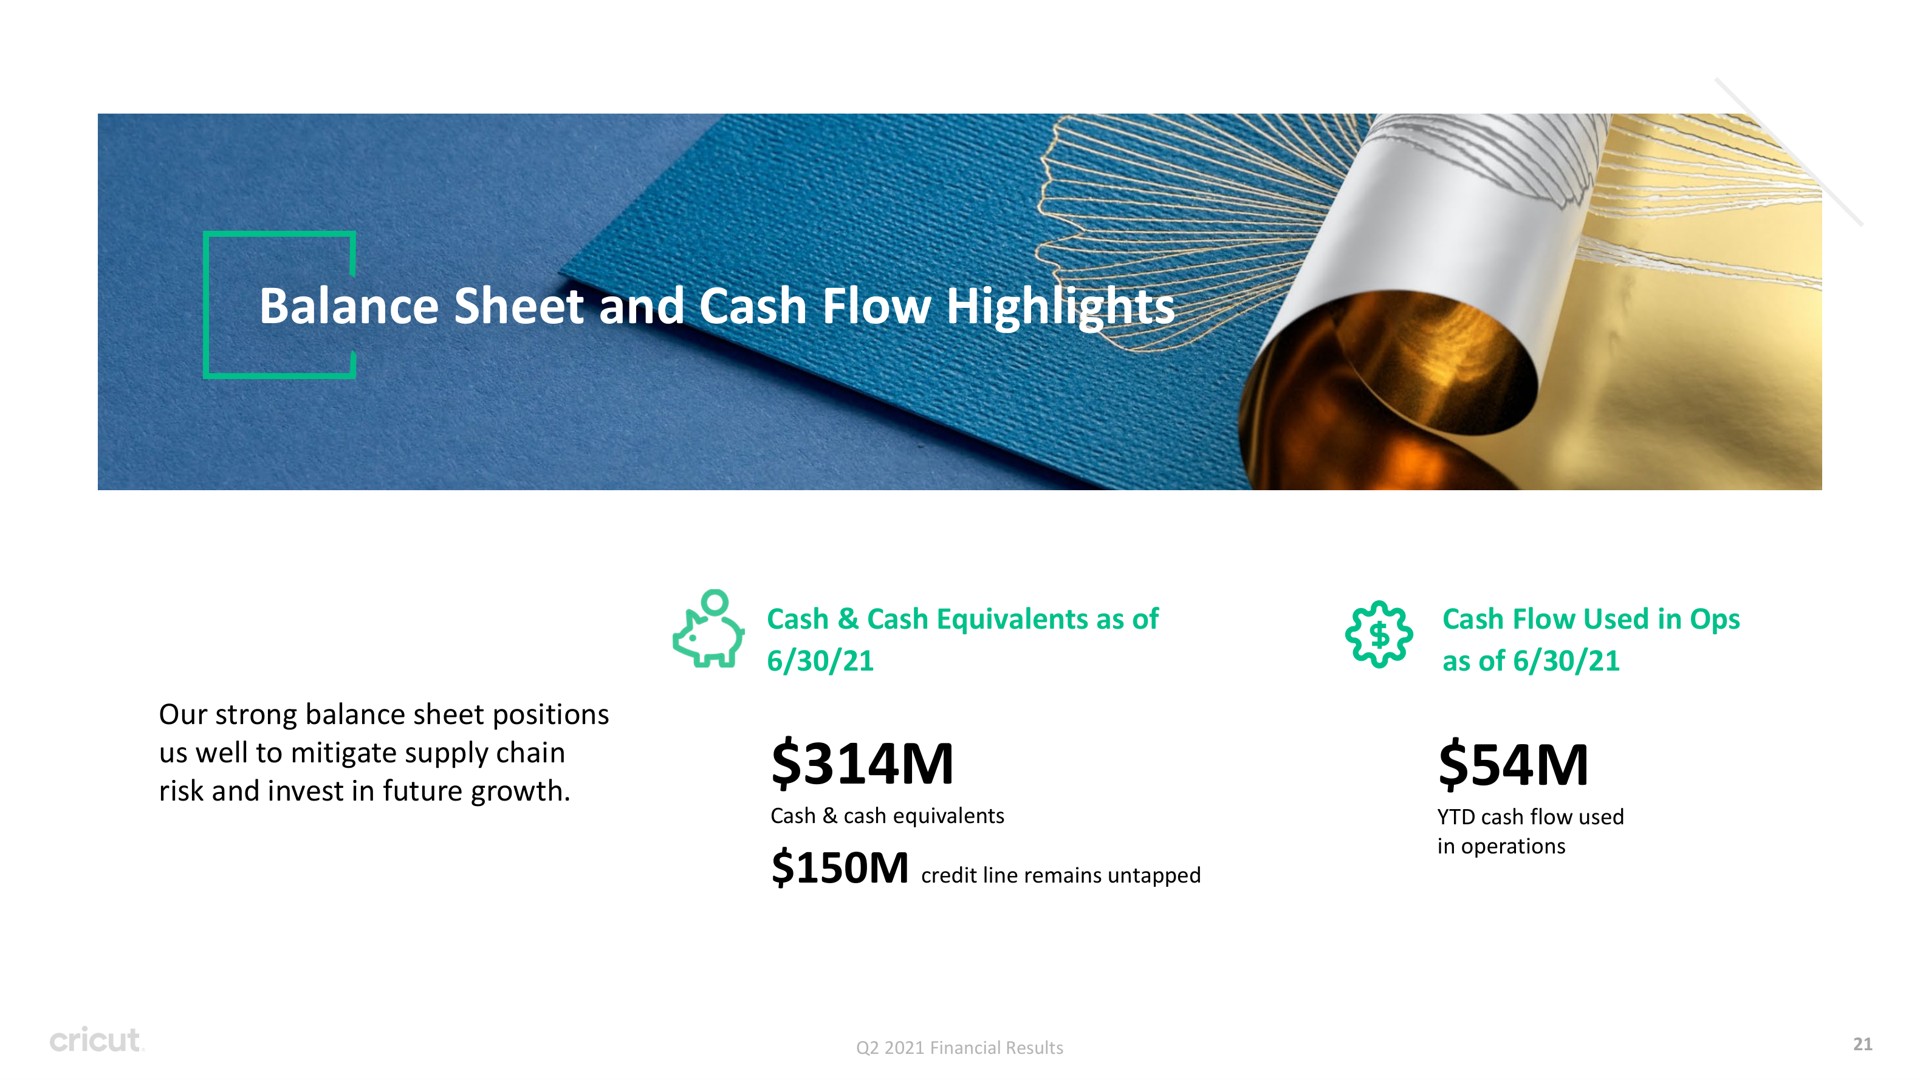 balance sheet and cash flow highlights us well to mitigate supply chain | Circut